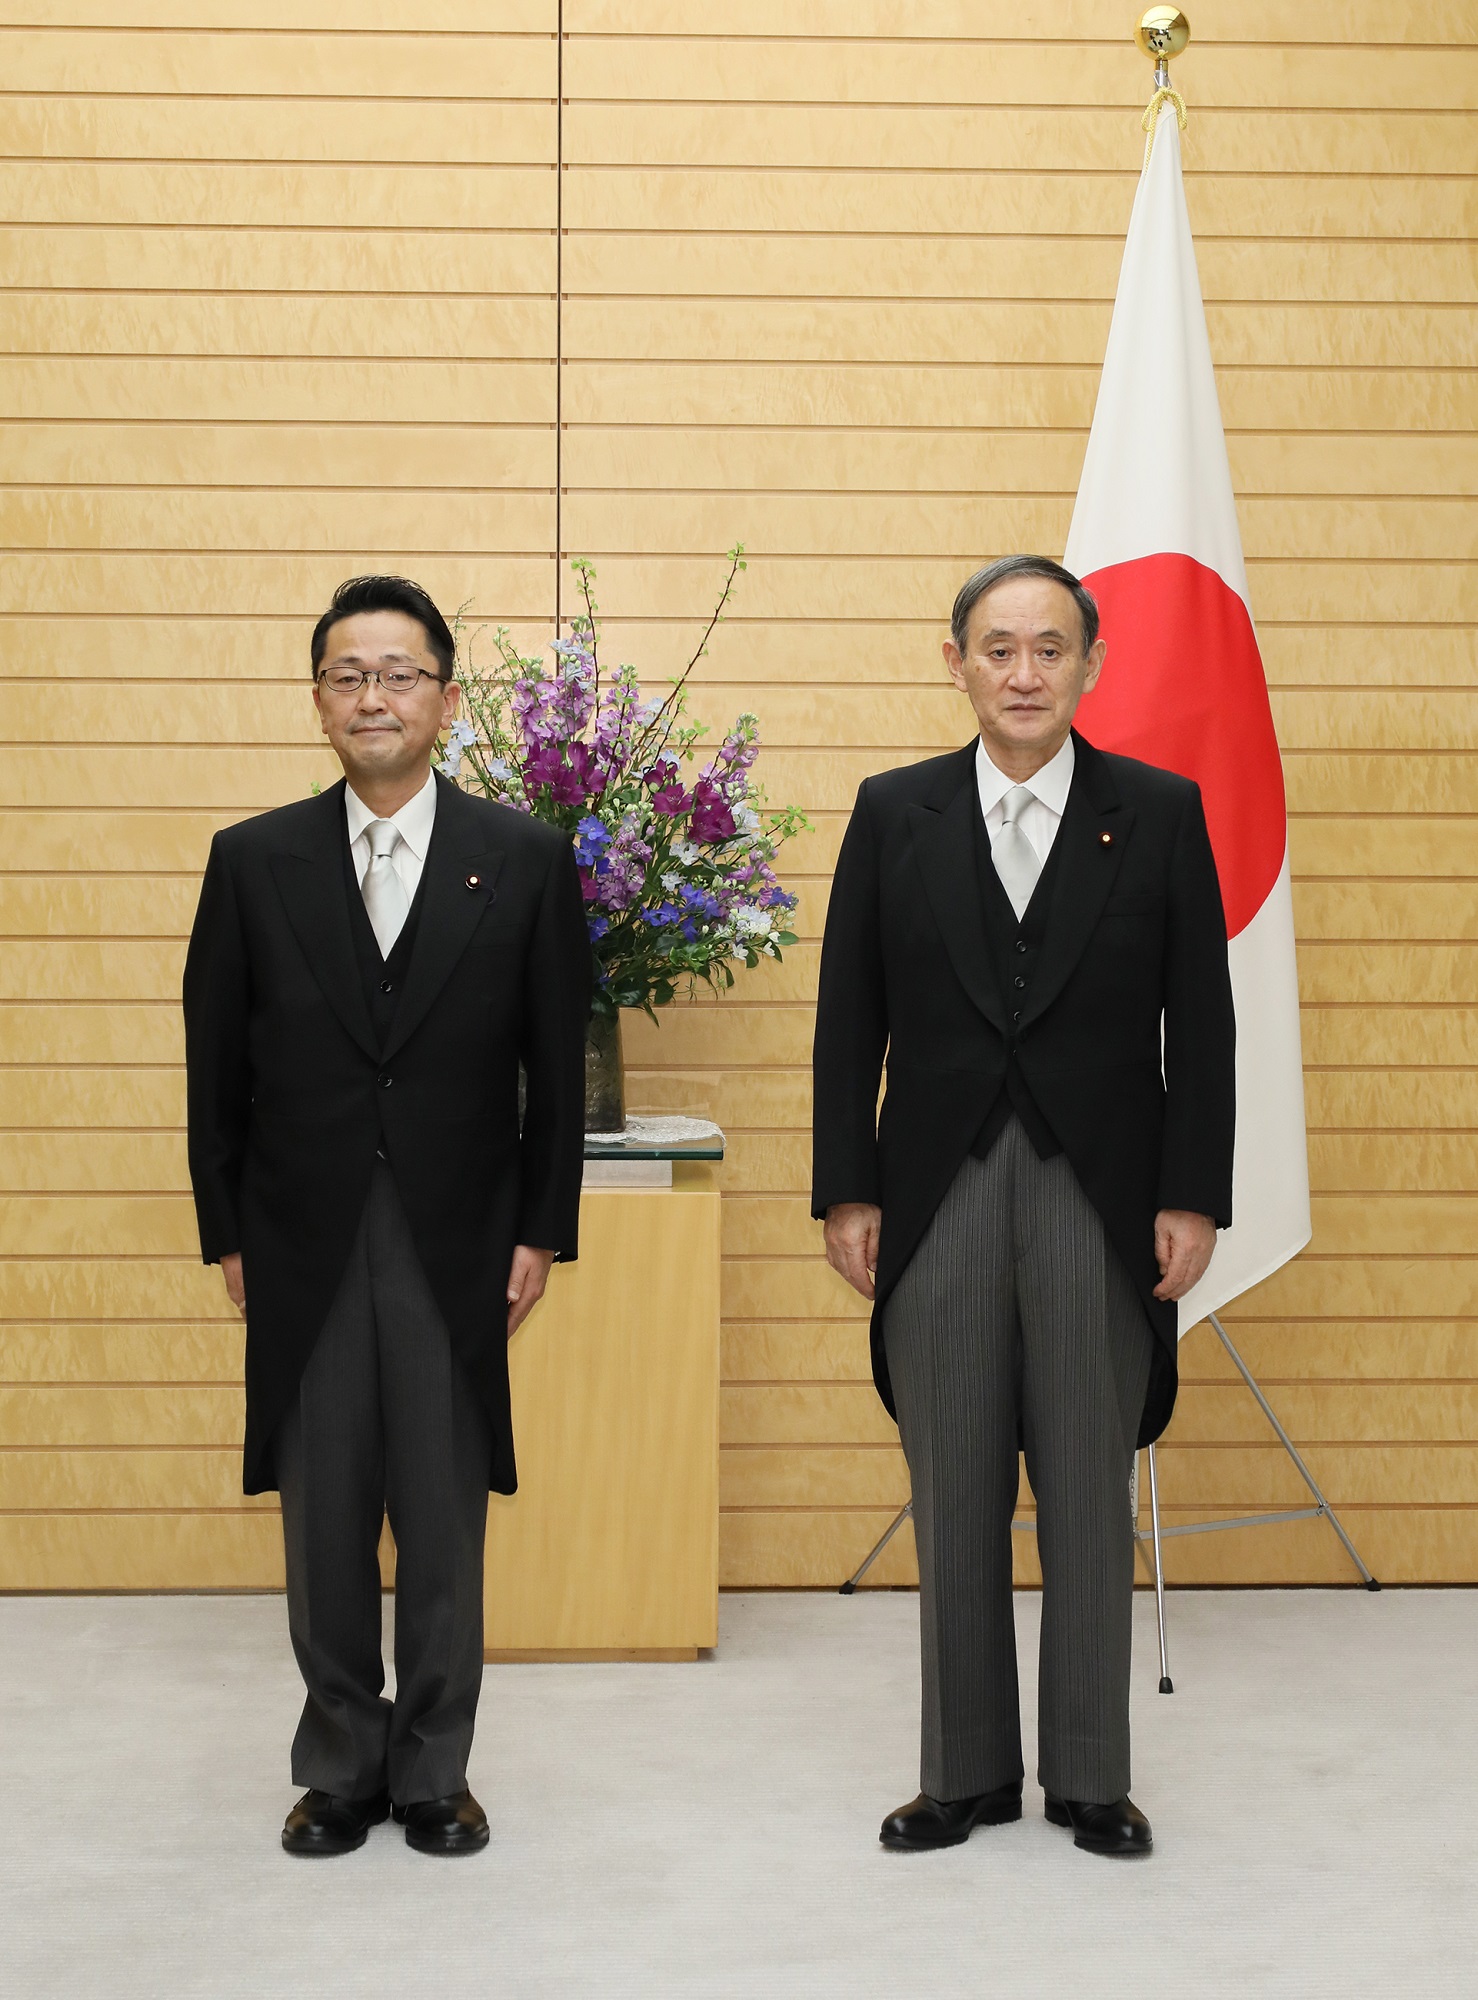 Photograph of the Prime Minister attending a photograph session with the newly appointed Minister Niwa (3)